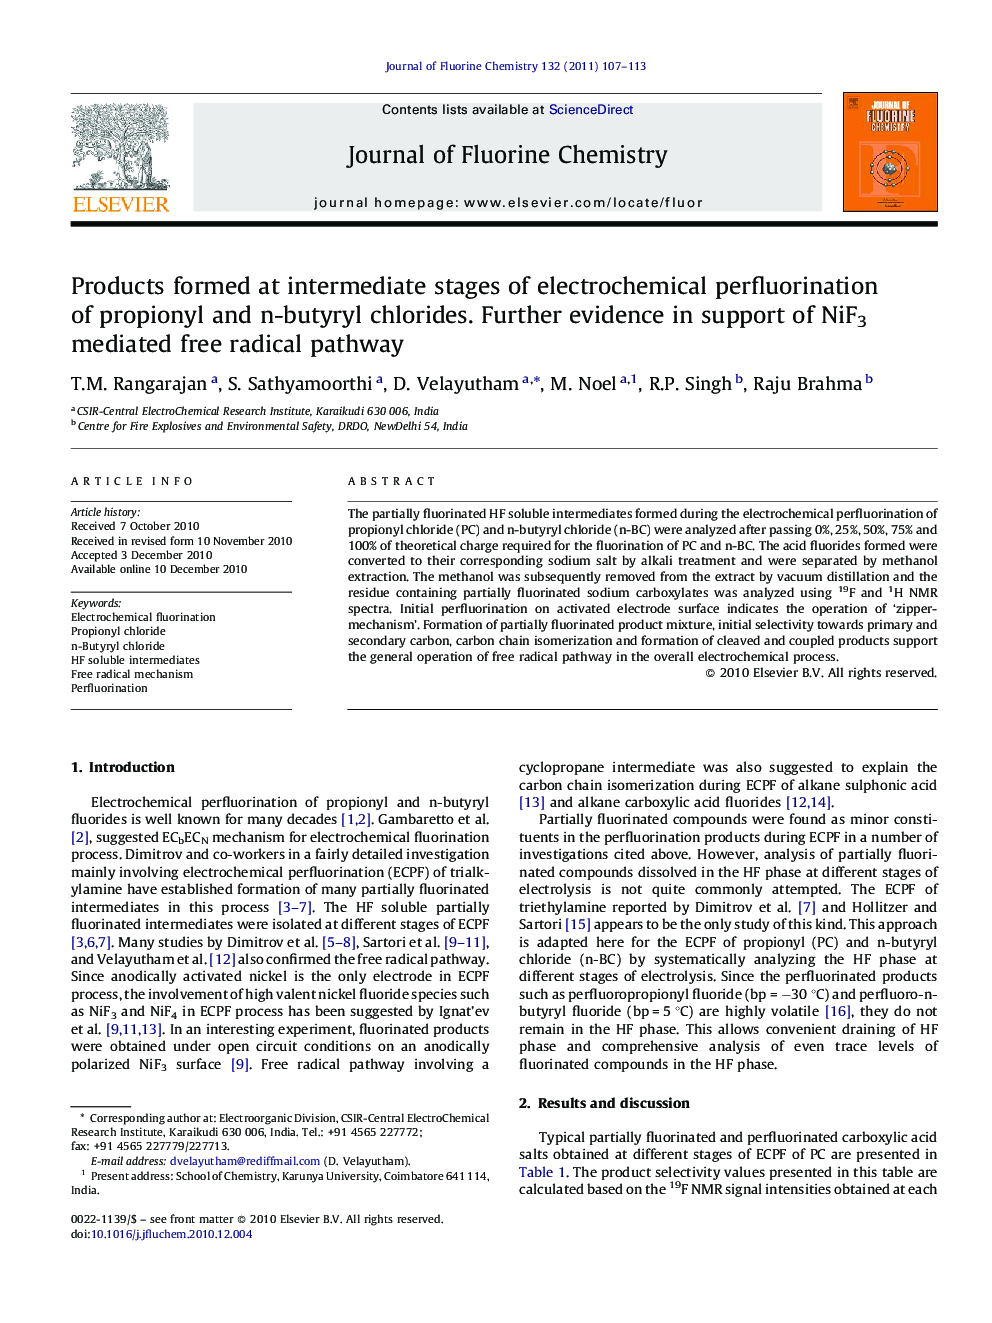 Products formed at intermediate stages of electrochemical perfluorination of propionyl and n-butyryl chlorides. Further evidence in support of NiF3 mediated free radical pathway